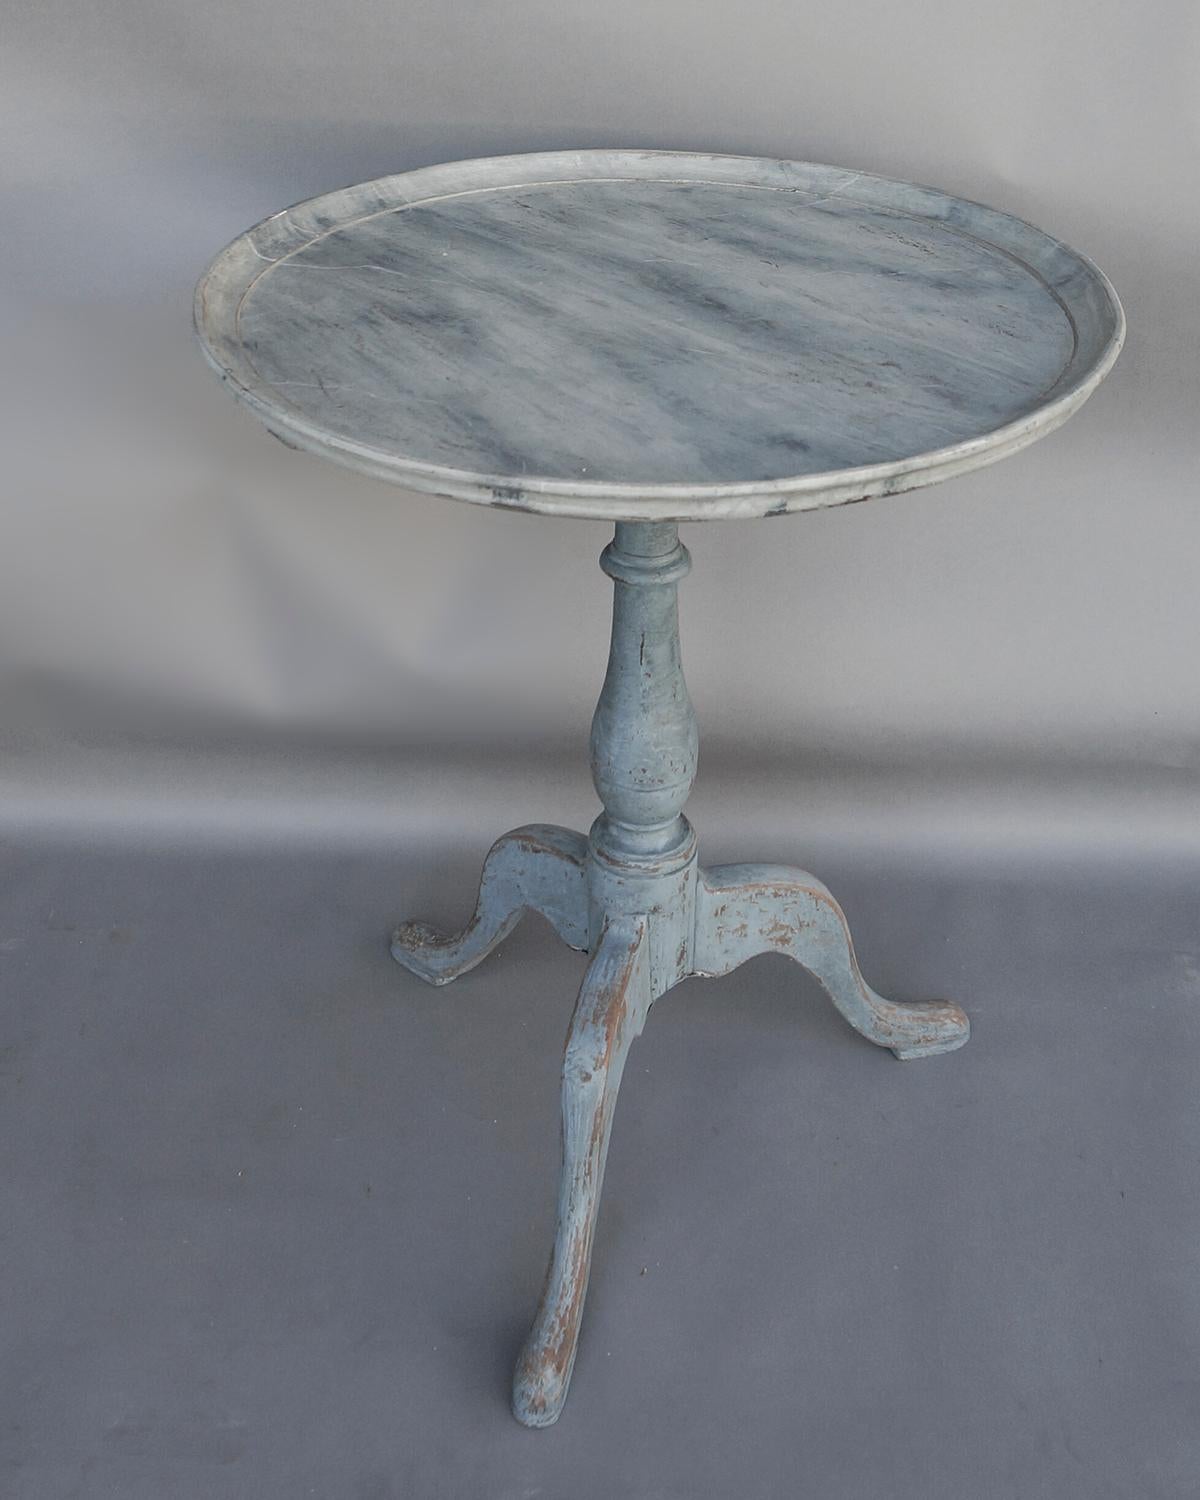 Round Swedish table, circa 1840, with tripod pedestal base in blue paint. The tray top has a beautifully marbleized surface in shades of blue, charcoal and Gustavian gray.